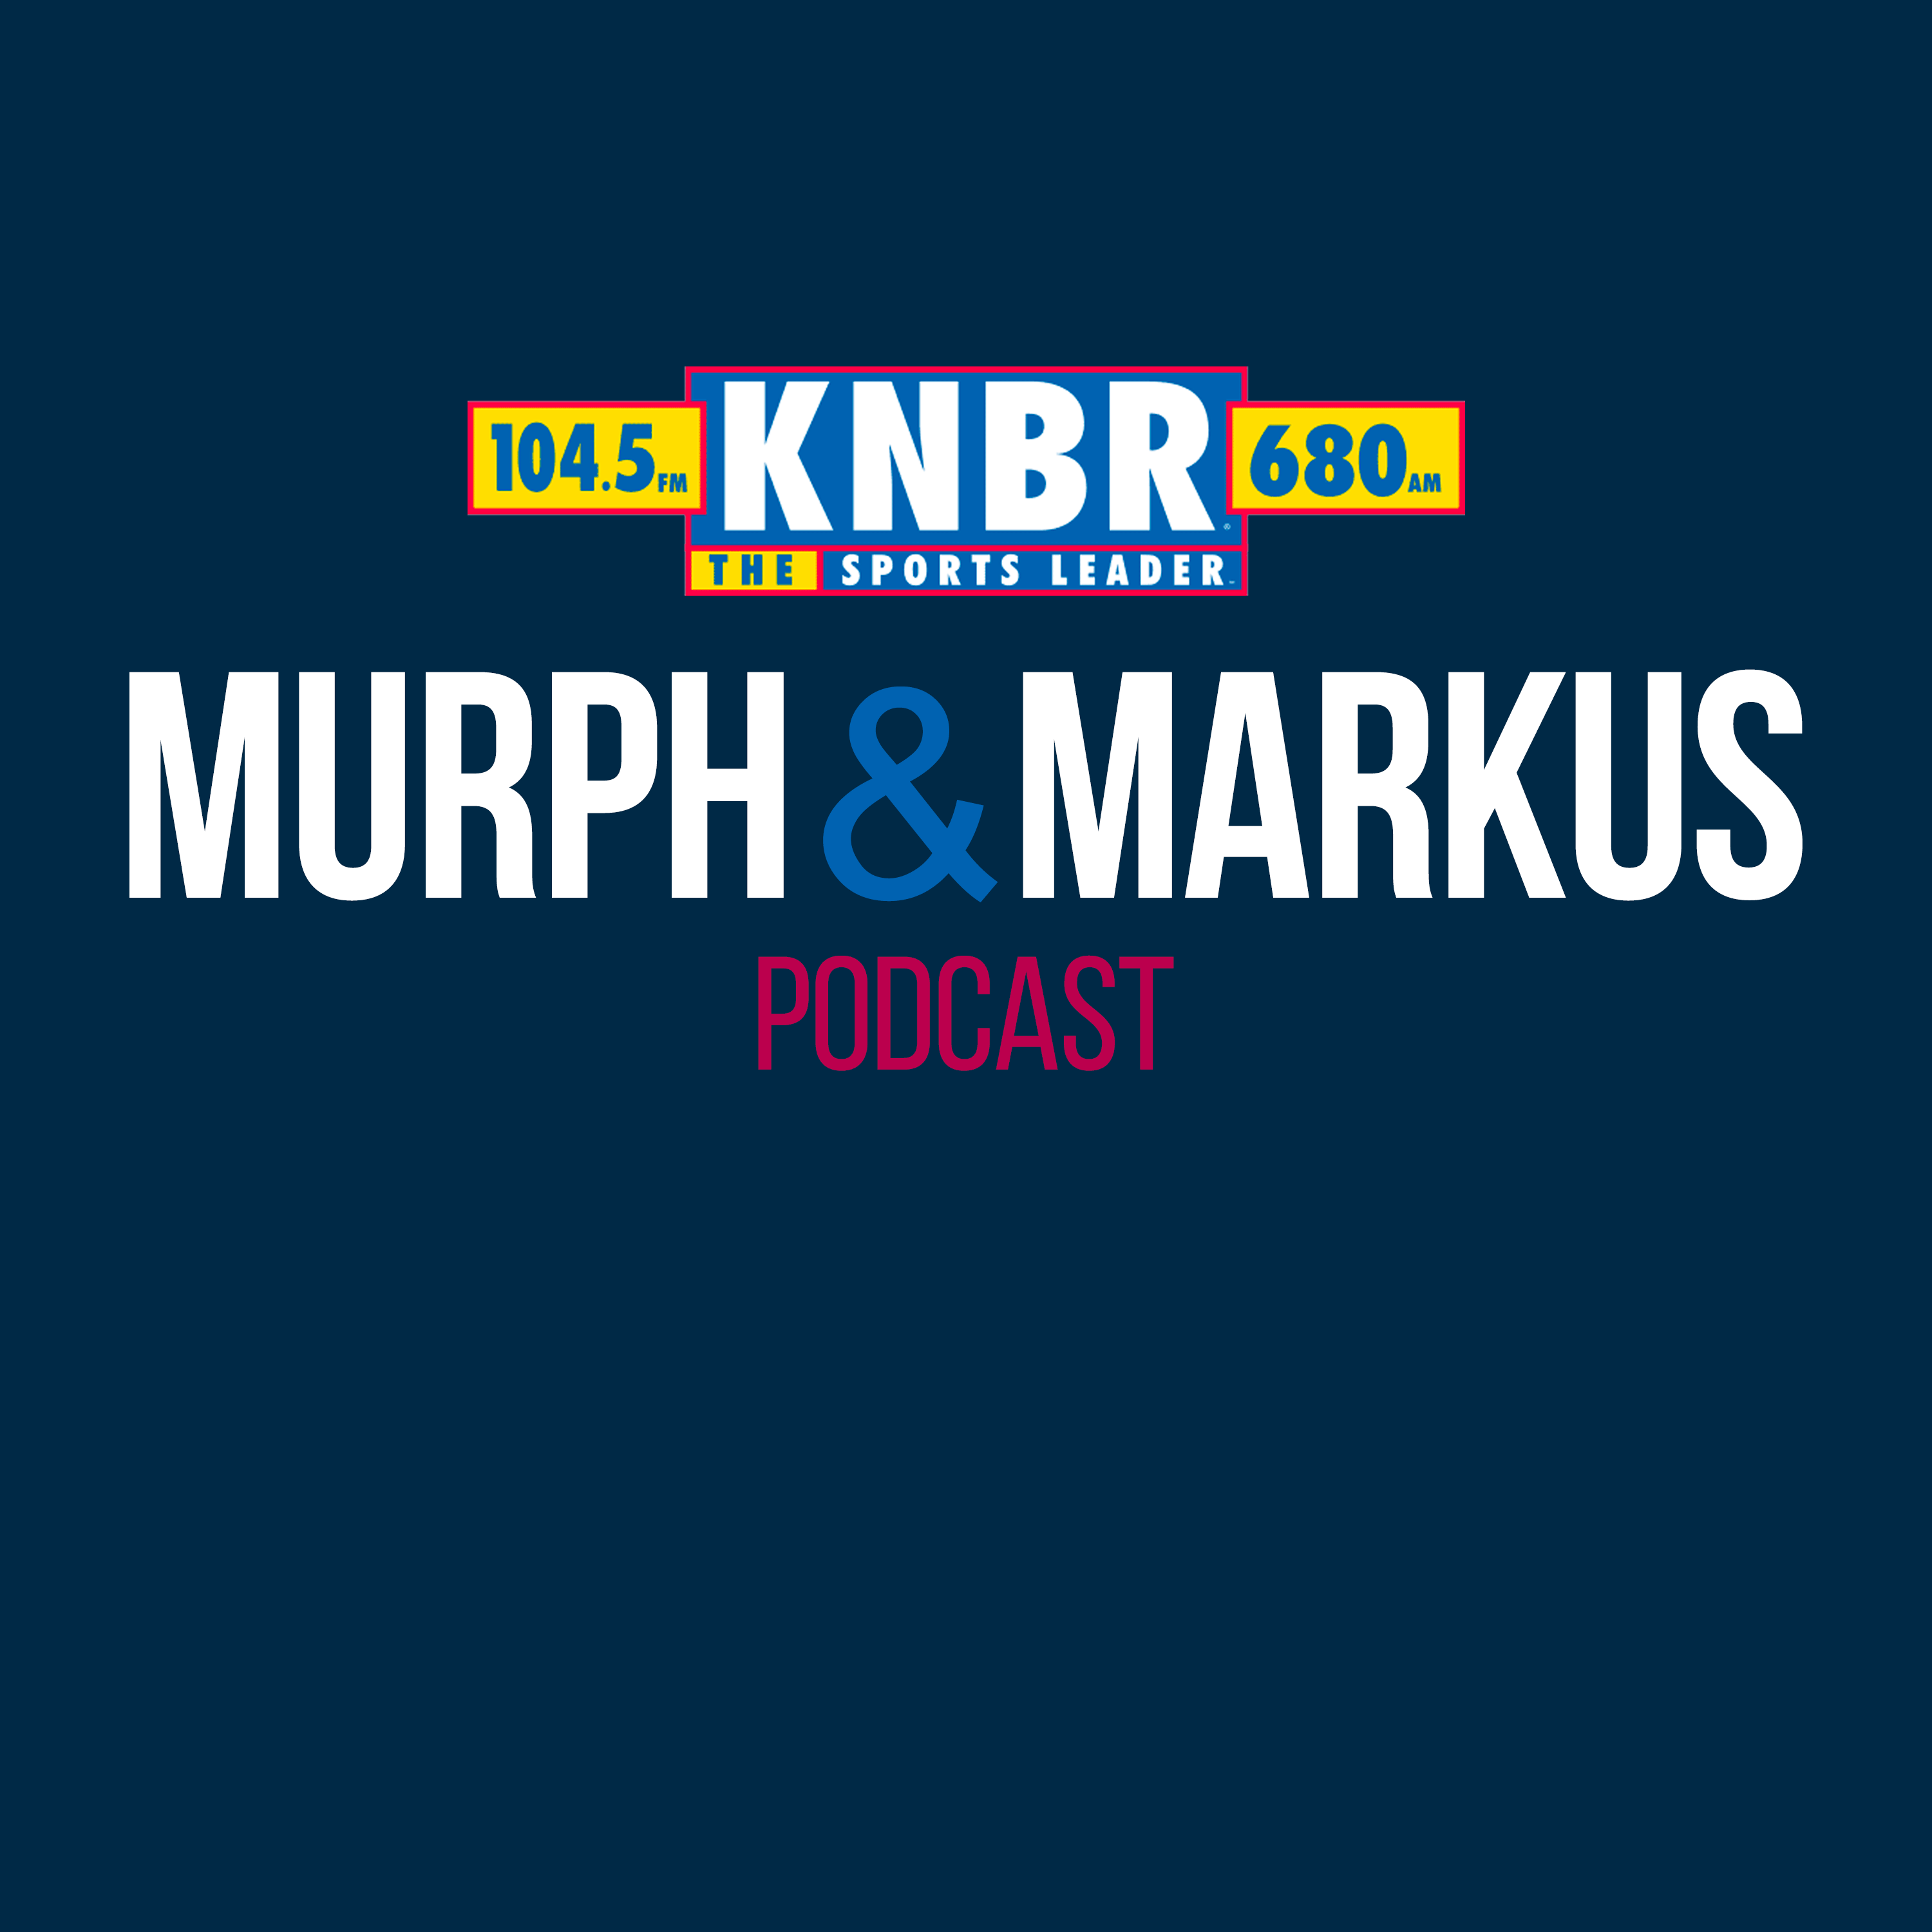 2-23 Bryan Price joins Murph & Markus to discuss his philosophy as a pitching coach and to give his perspective on letting starters pitch deep into the game